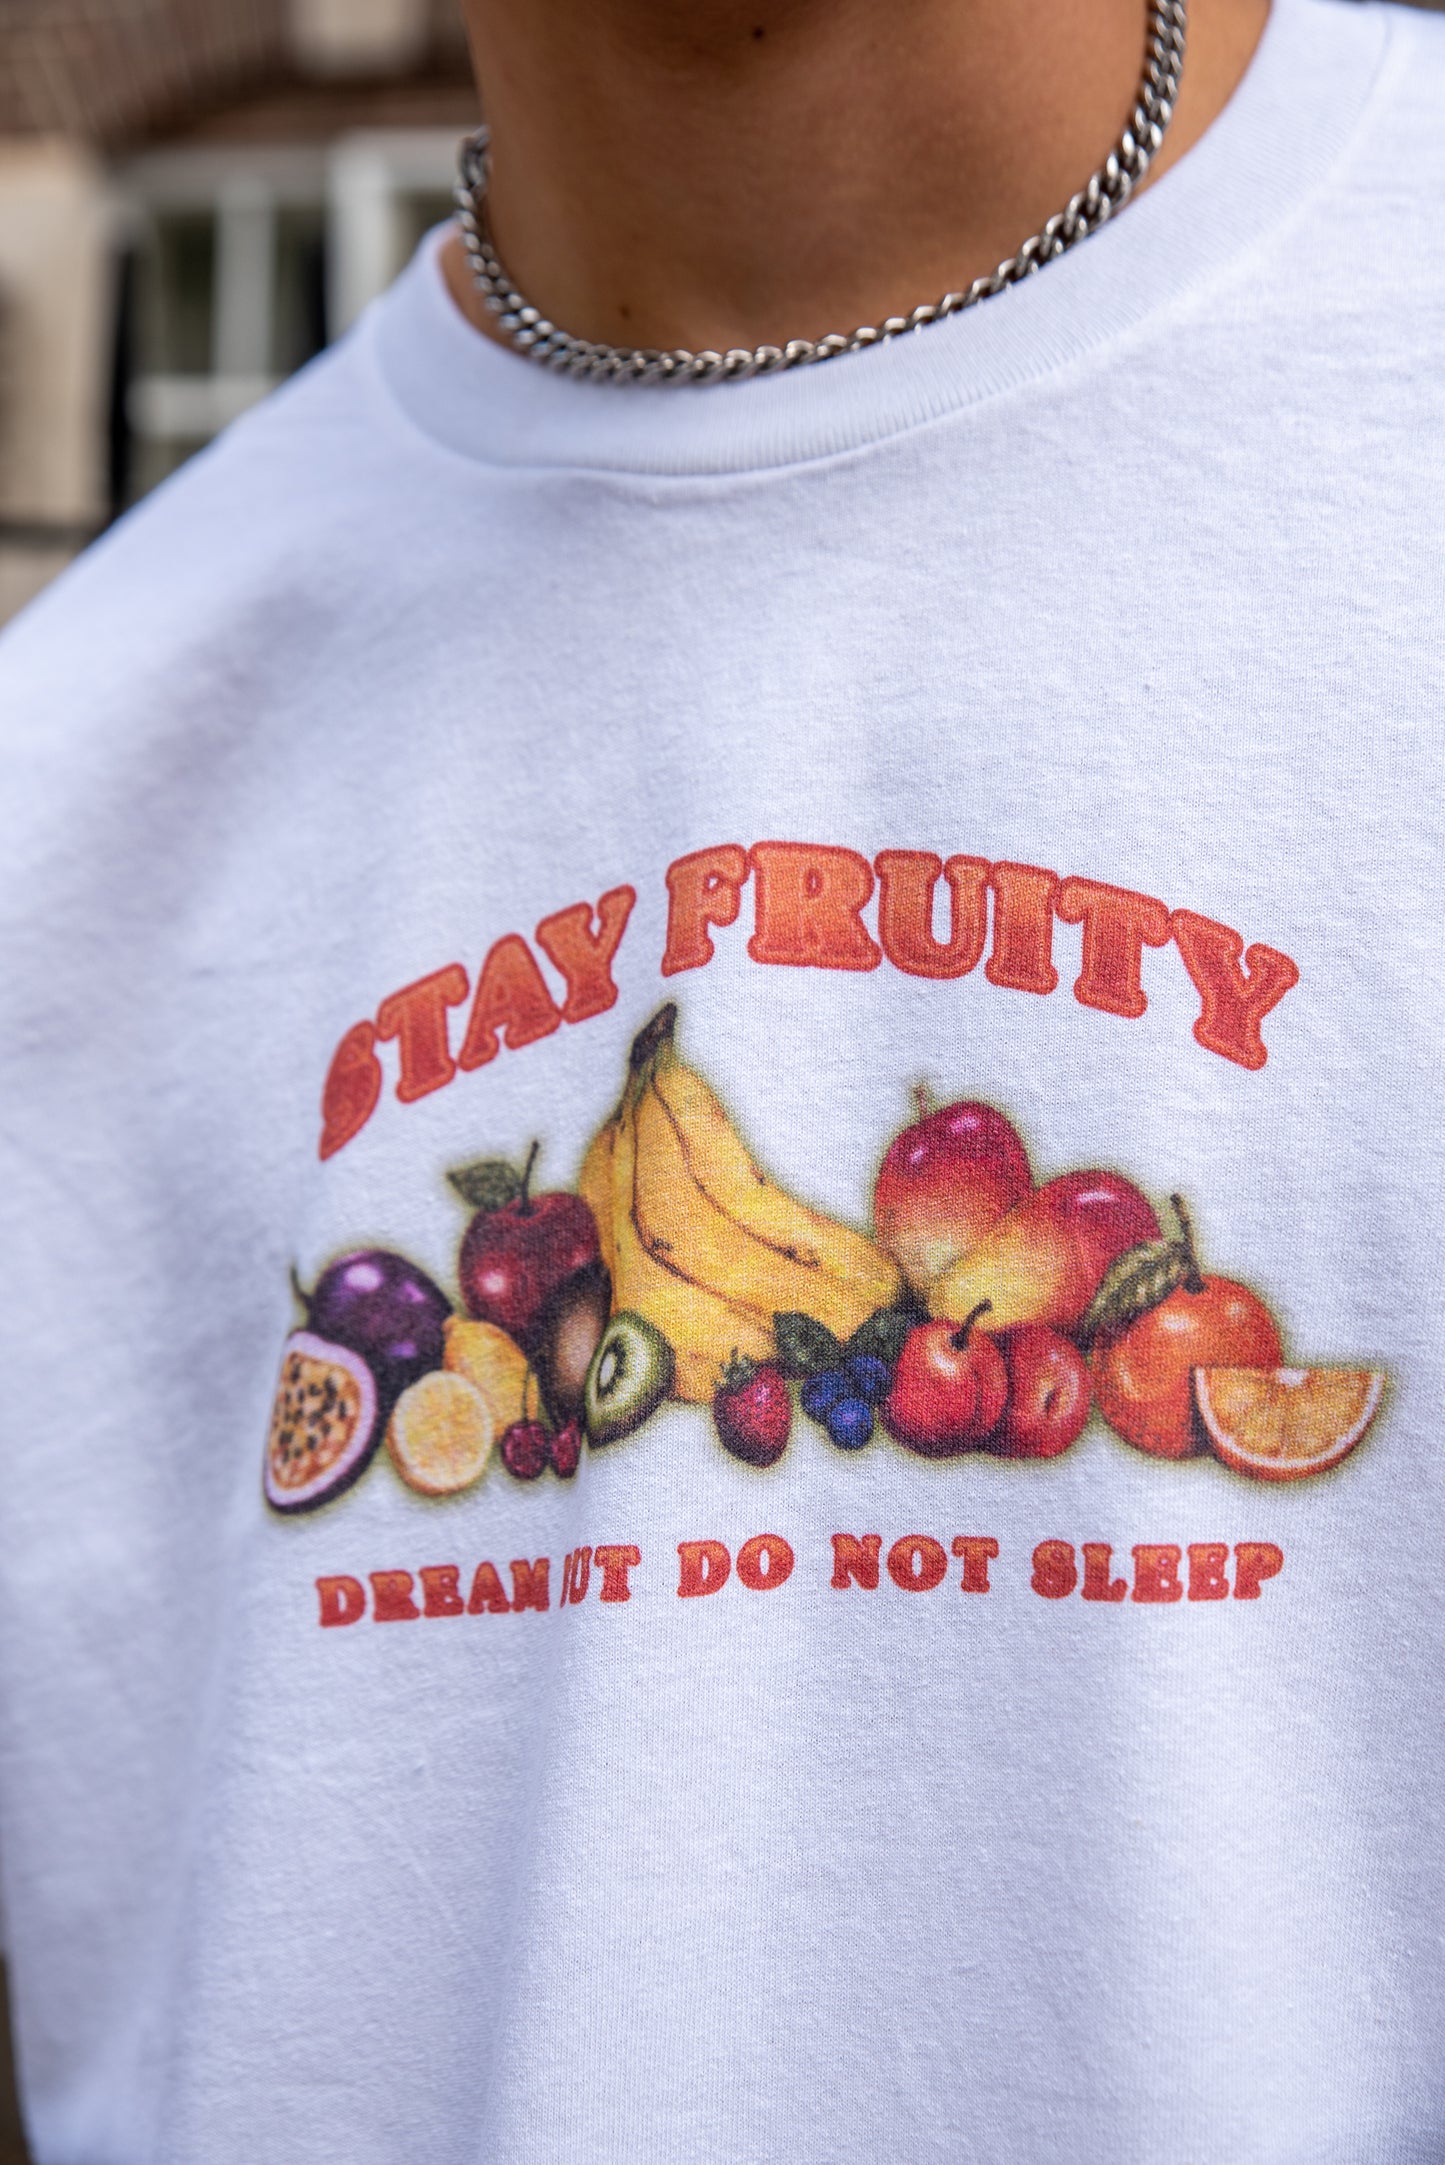 Short Sleeved T-shirt in White In Stay Fruity Print